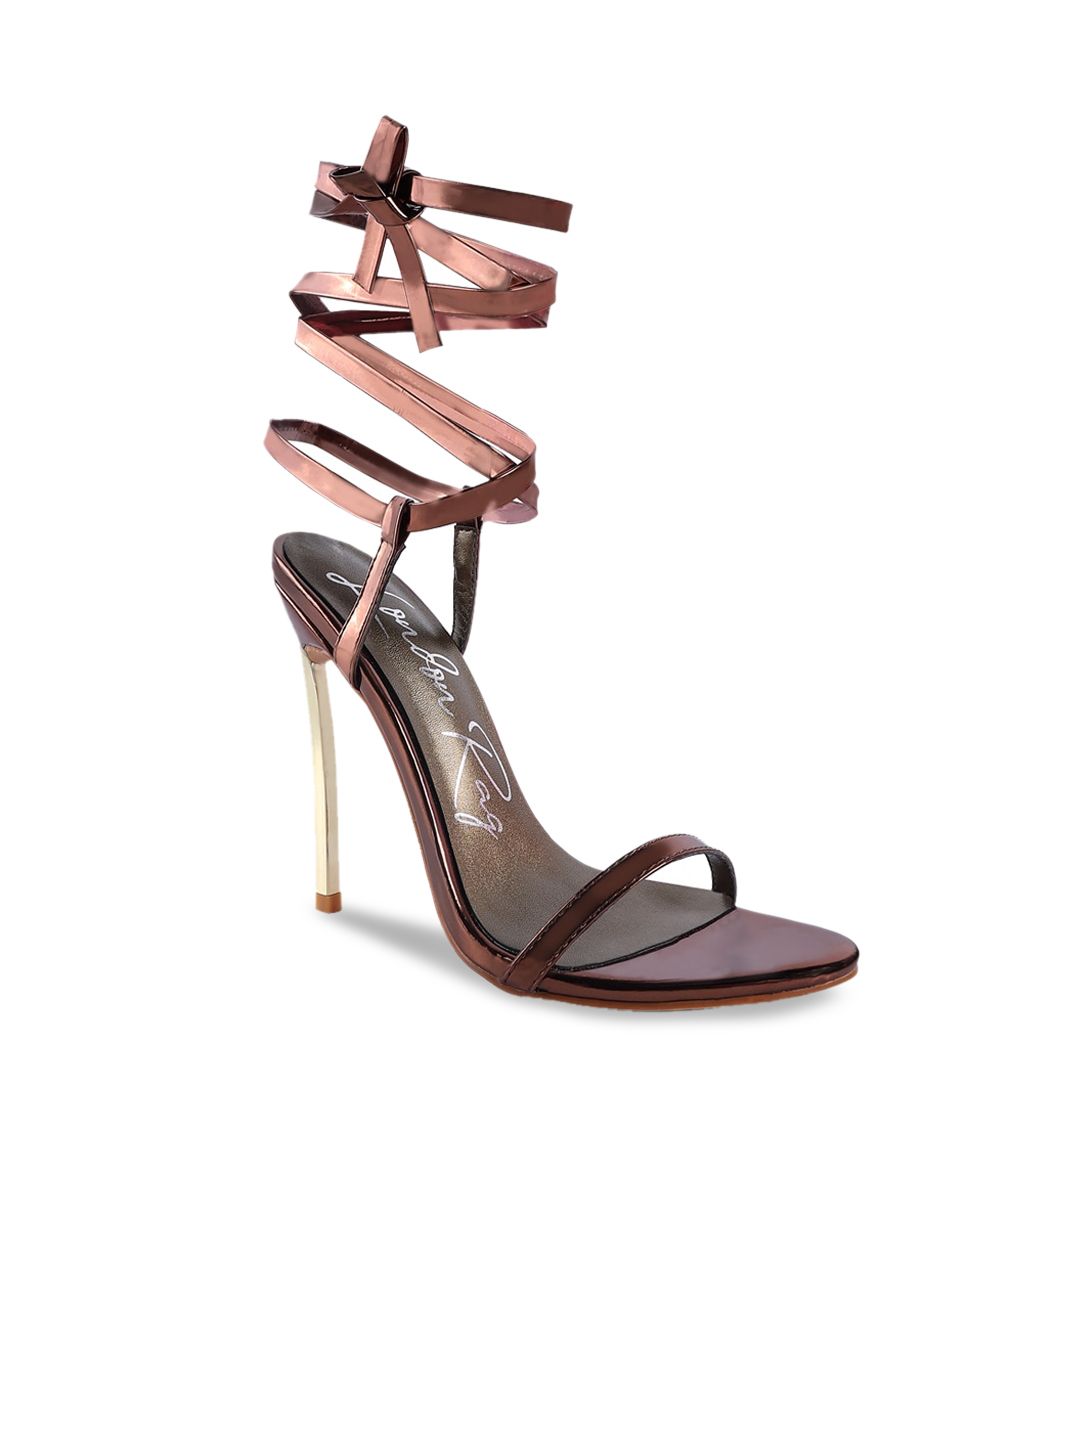 London Rag Bronze-Toned Striped PU Party Stiletto Sandals with Buckles Price in India